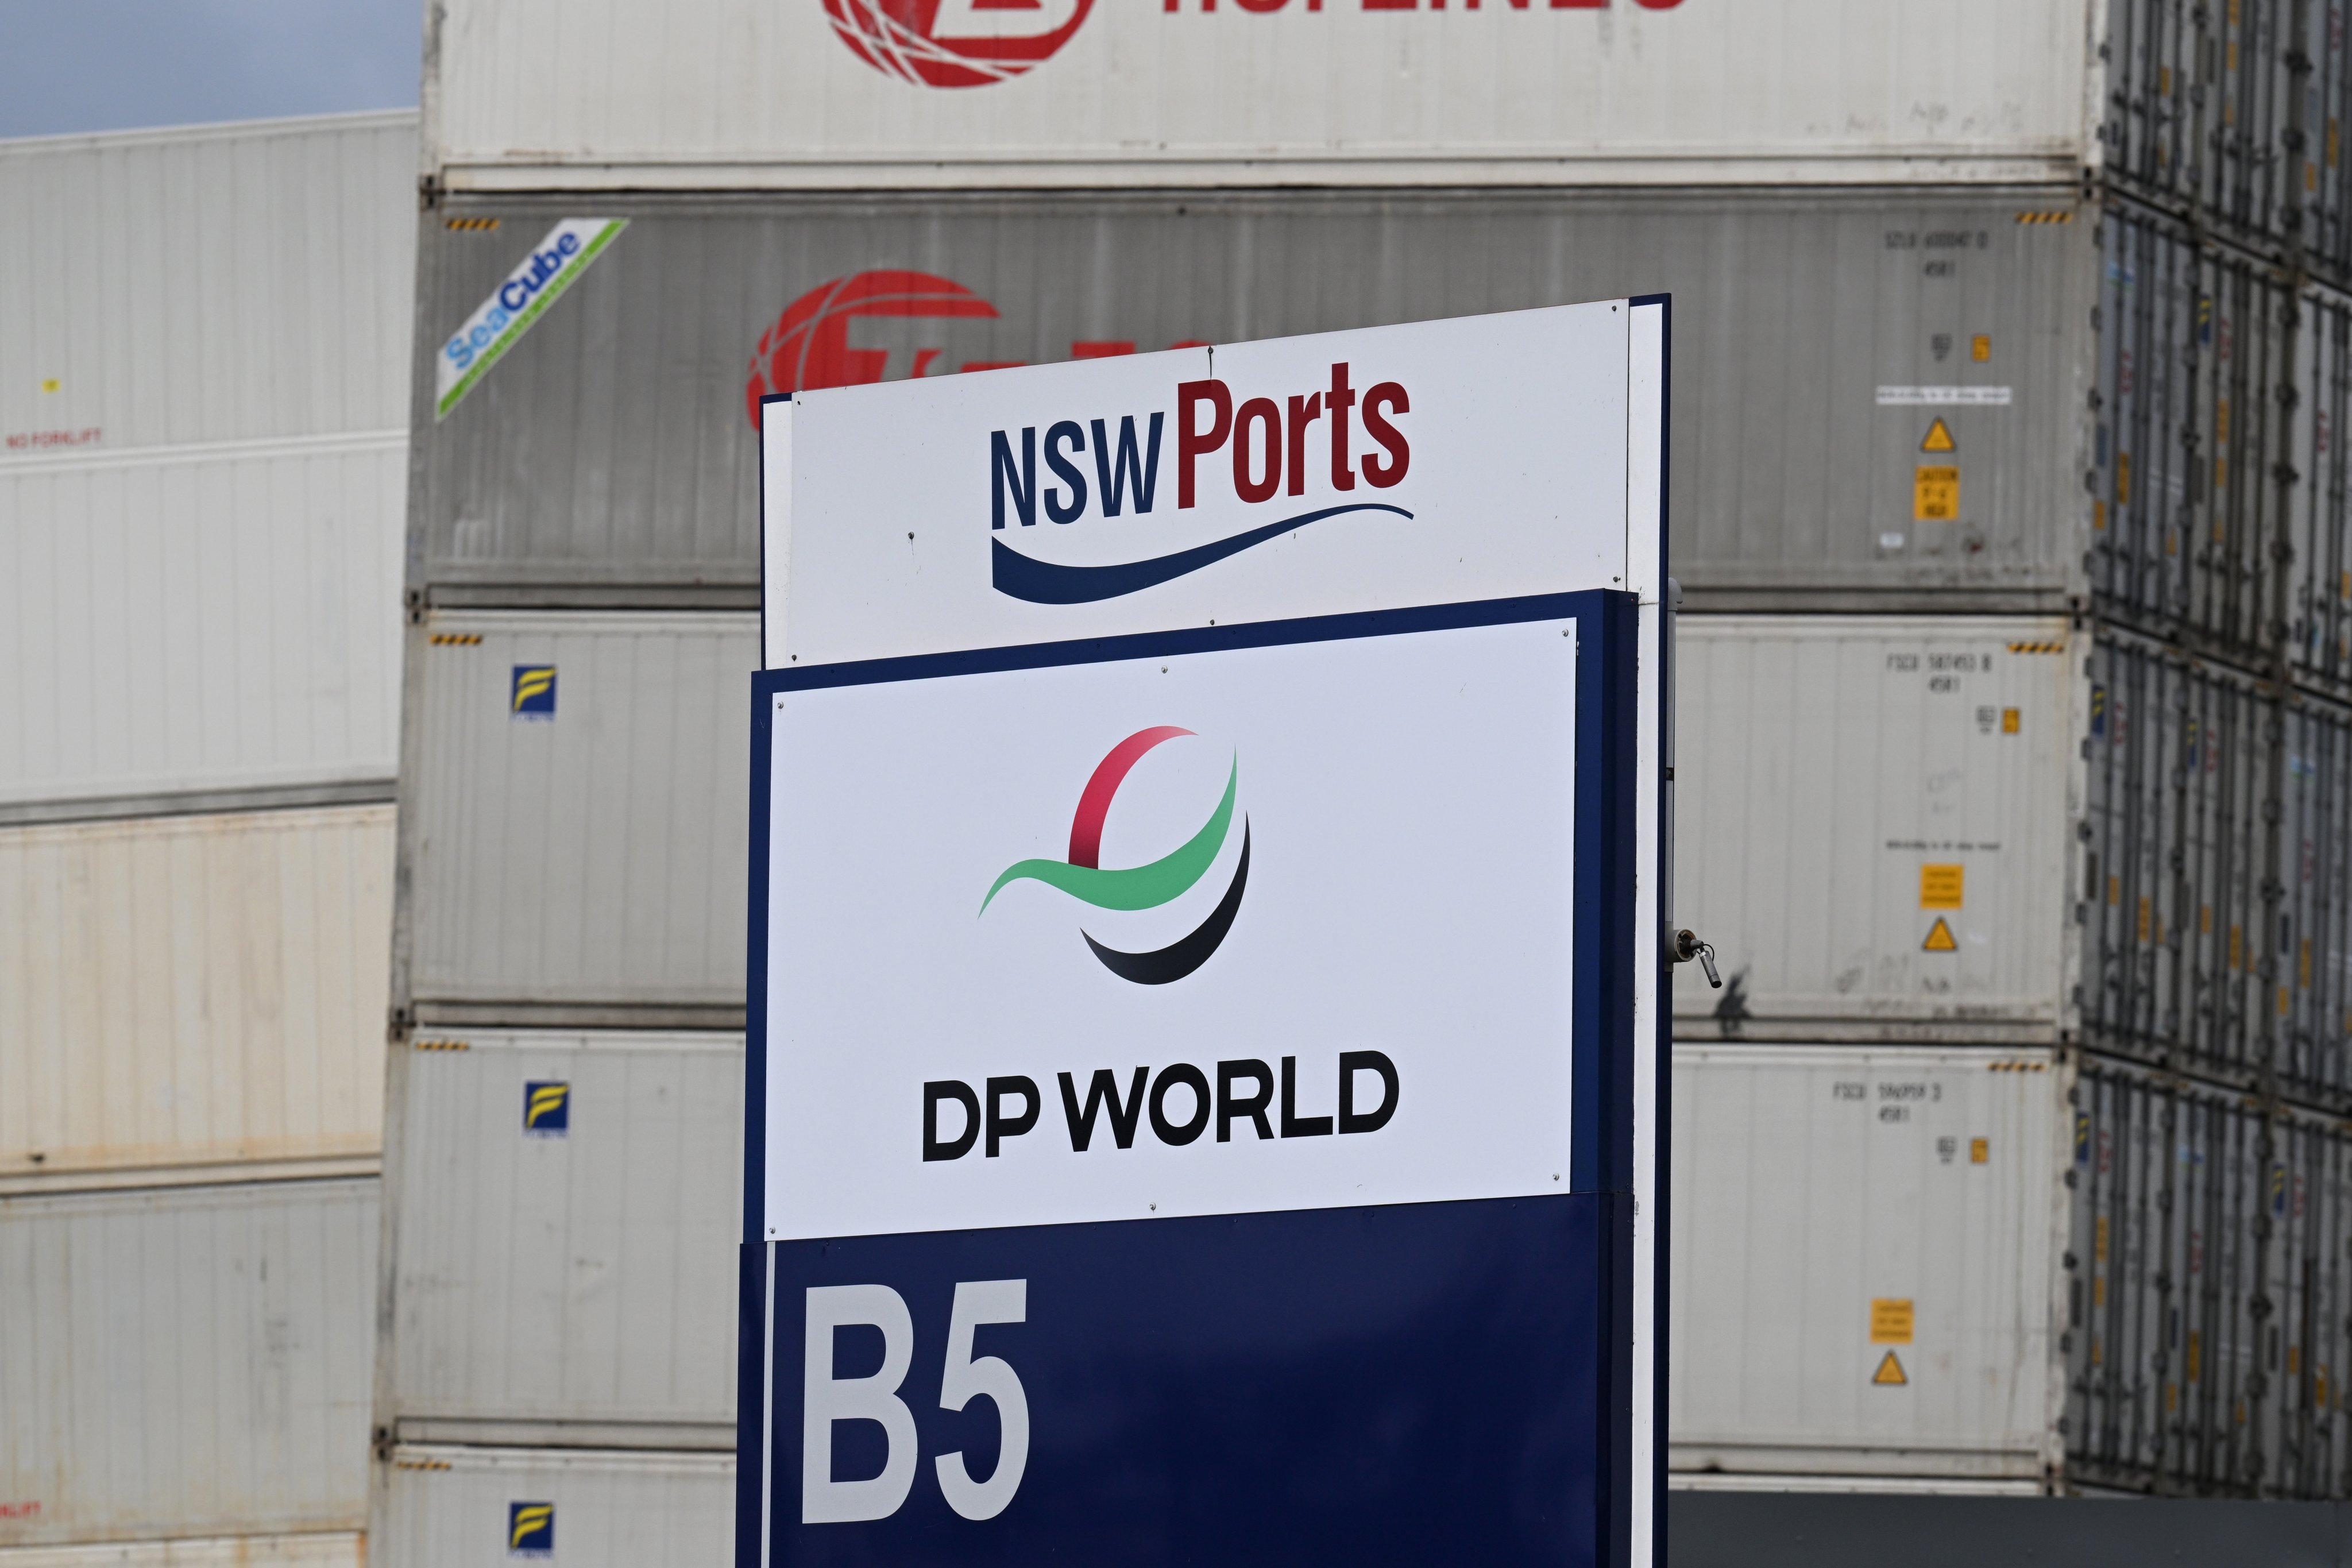 Ports operator DP World Australia, which was the target of a malicious cyber attack according to Australian authorities, is focused on getting containers at ports across Australia moving again. Photo: EPA-EFE